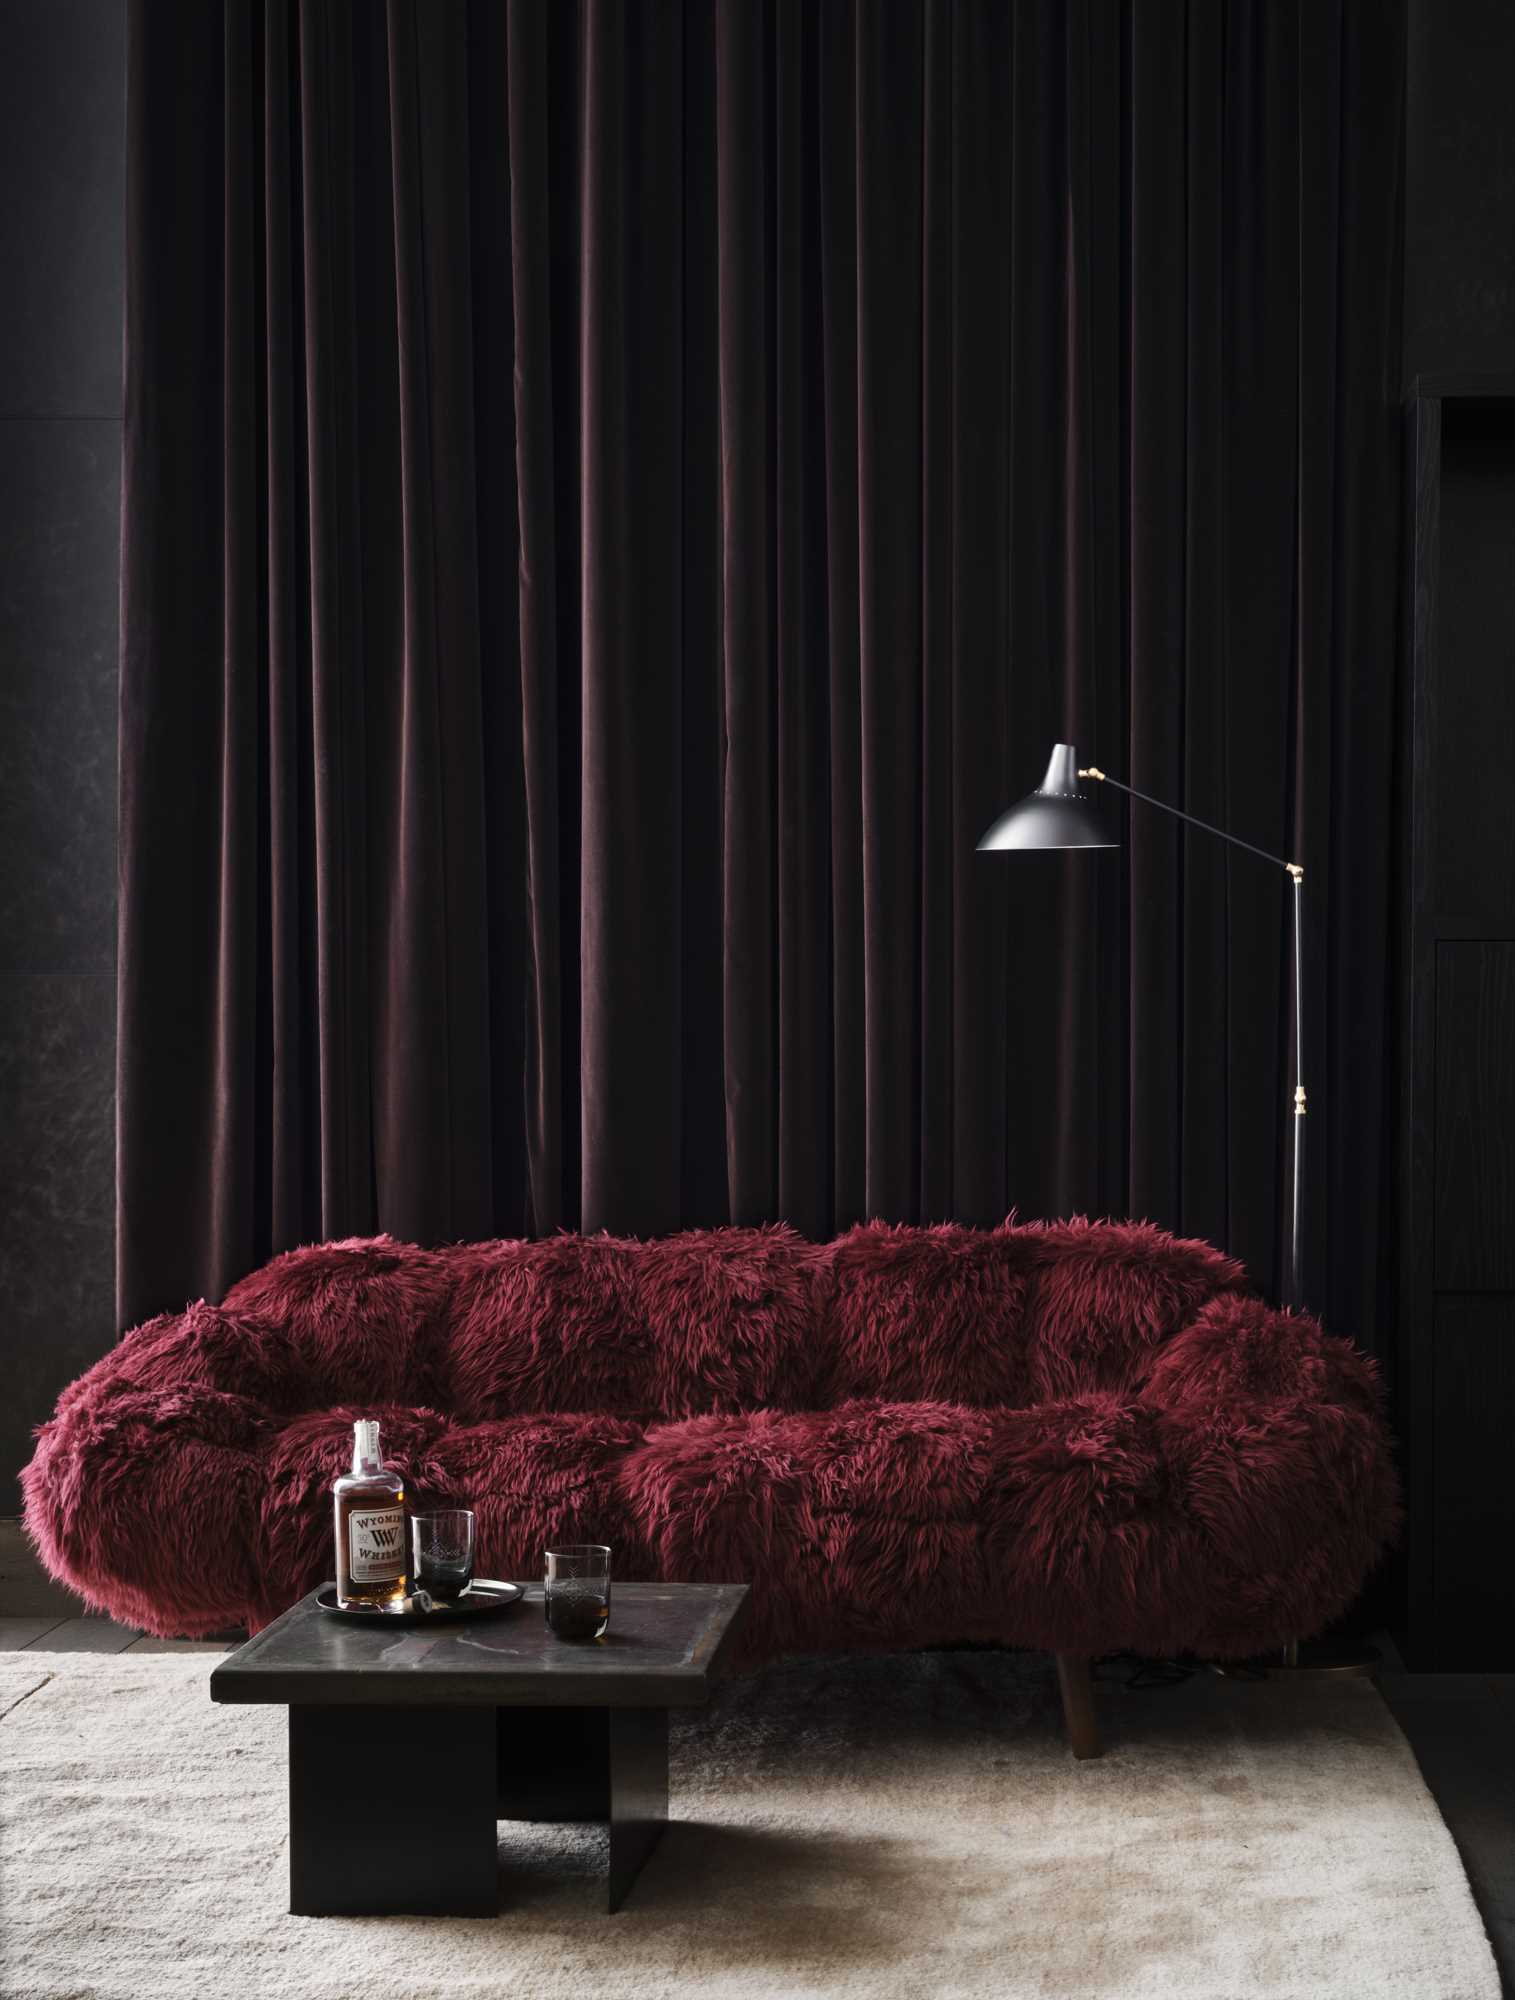 A luxurious red couch with a dark background.